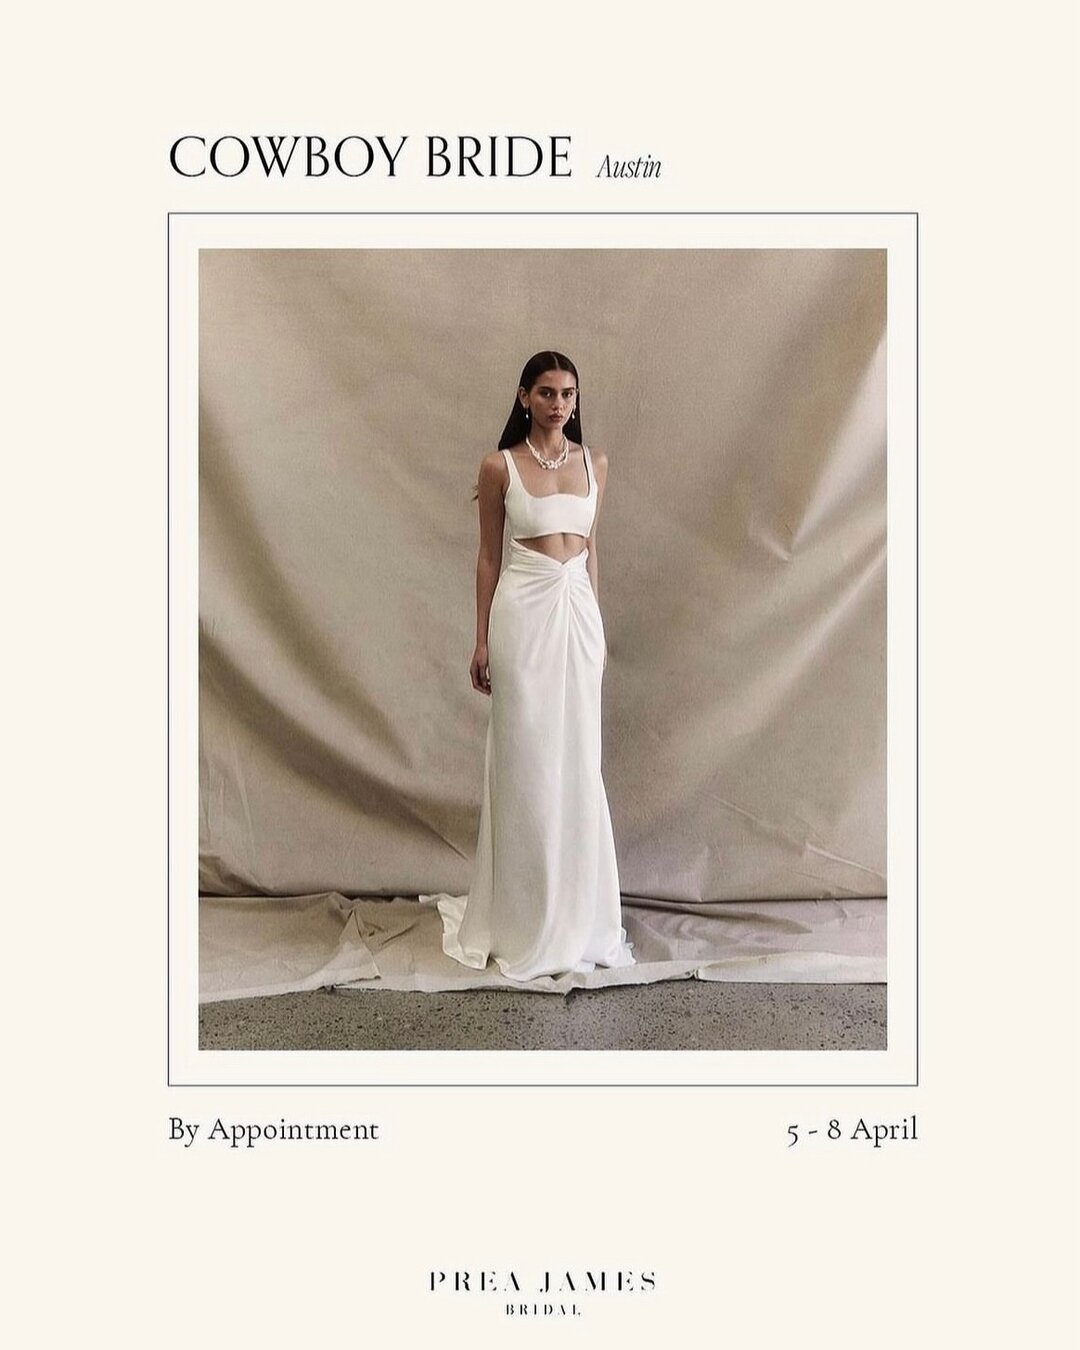 TEXAS TRUNK SHOW | Only 1 month until our 2024 Allure collection trunk show at the newly opened @cowboy_bride Austin! Showcasing one weekend only 5 - 8 April, be sure to book an appointment via the Trunk Shows link in our bio to not miss out 🫶🏼